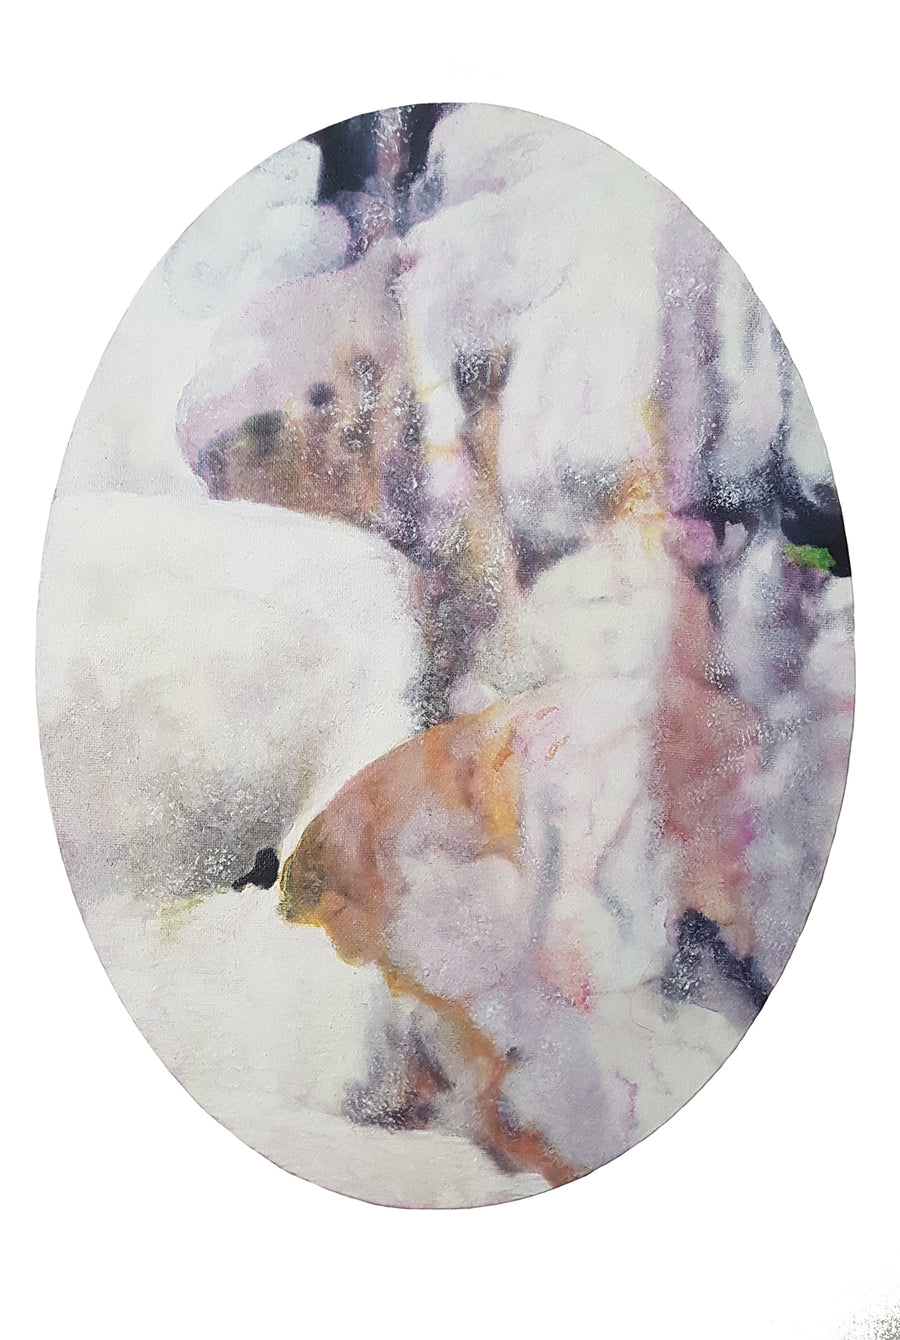 An abstract oil painting on a small oval canvas of the calcified waterfall and hot springs at Bagni San Filippo, Italy. Depicting a solid white cascade that resembles snow or ice in form, streaked with peach and pink.